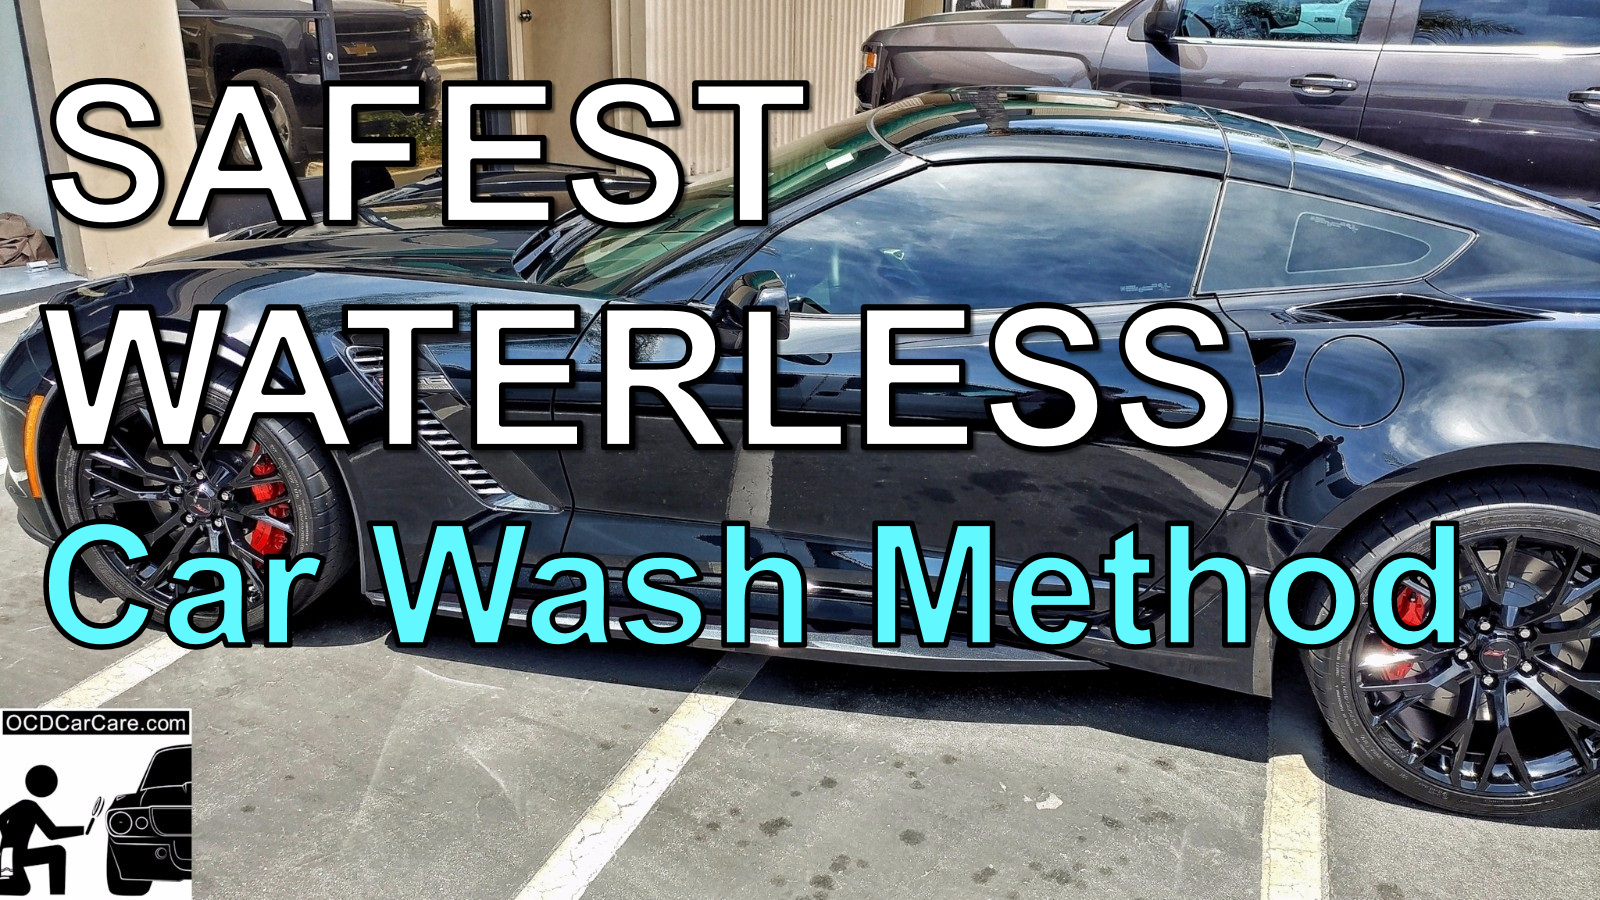 Best & Safest Waterless Car Wash technique in auto detailing and car care, courtesy of OCDCarCare Los Angeles